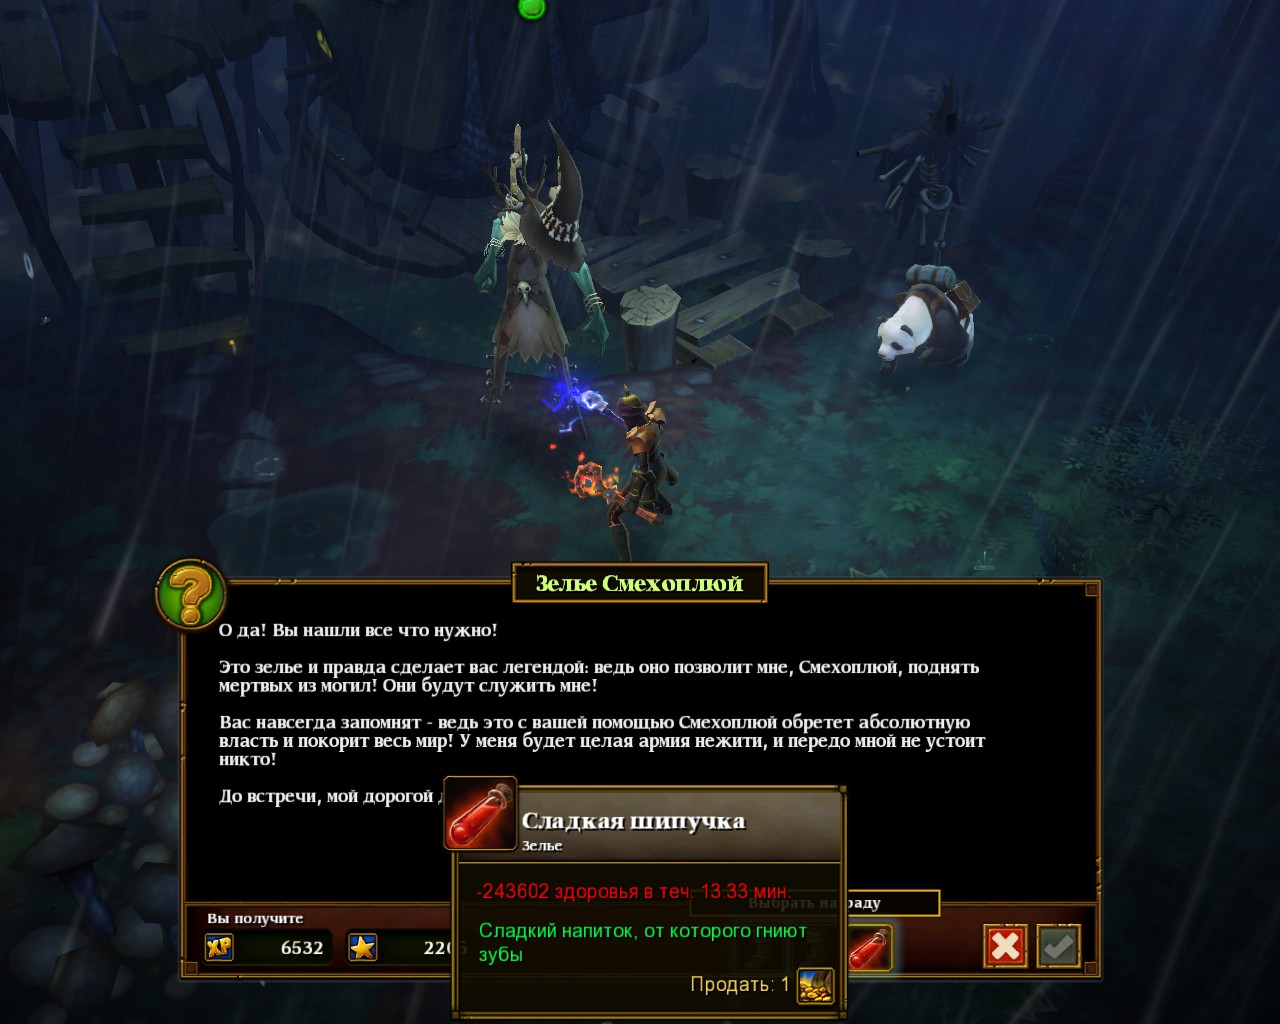 how do i download the synergies mod on torchlight 2